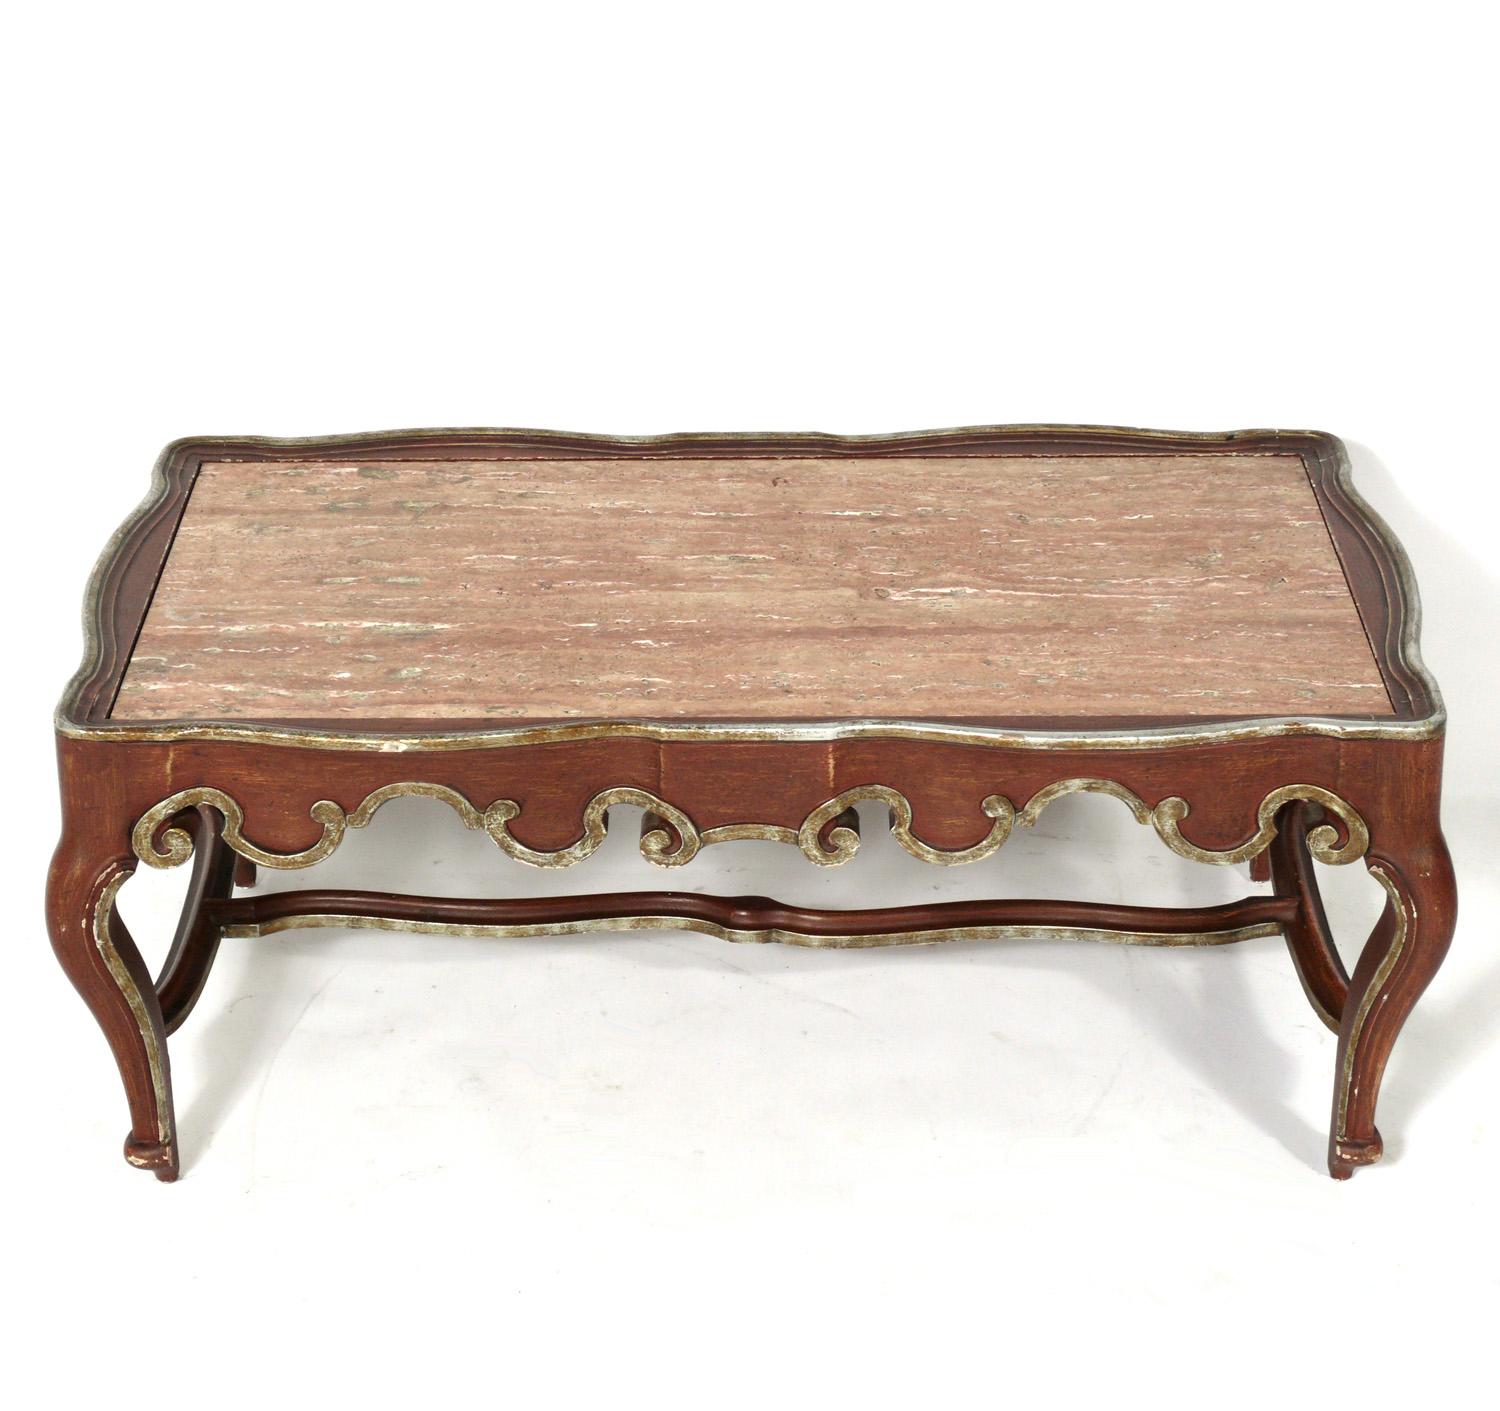 Elegant Italian marble-top coffee table, imported for Baker, circa 1950s. Hand carved wood frame finished in a deep Chinese red color, with silver leaf trim.